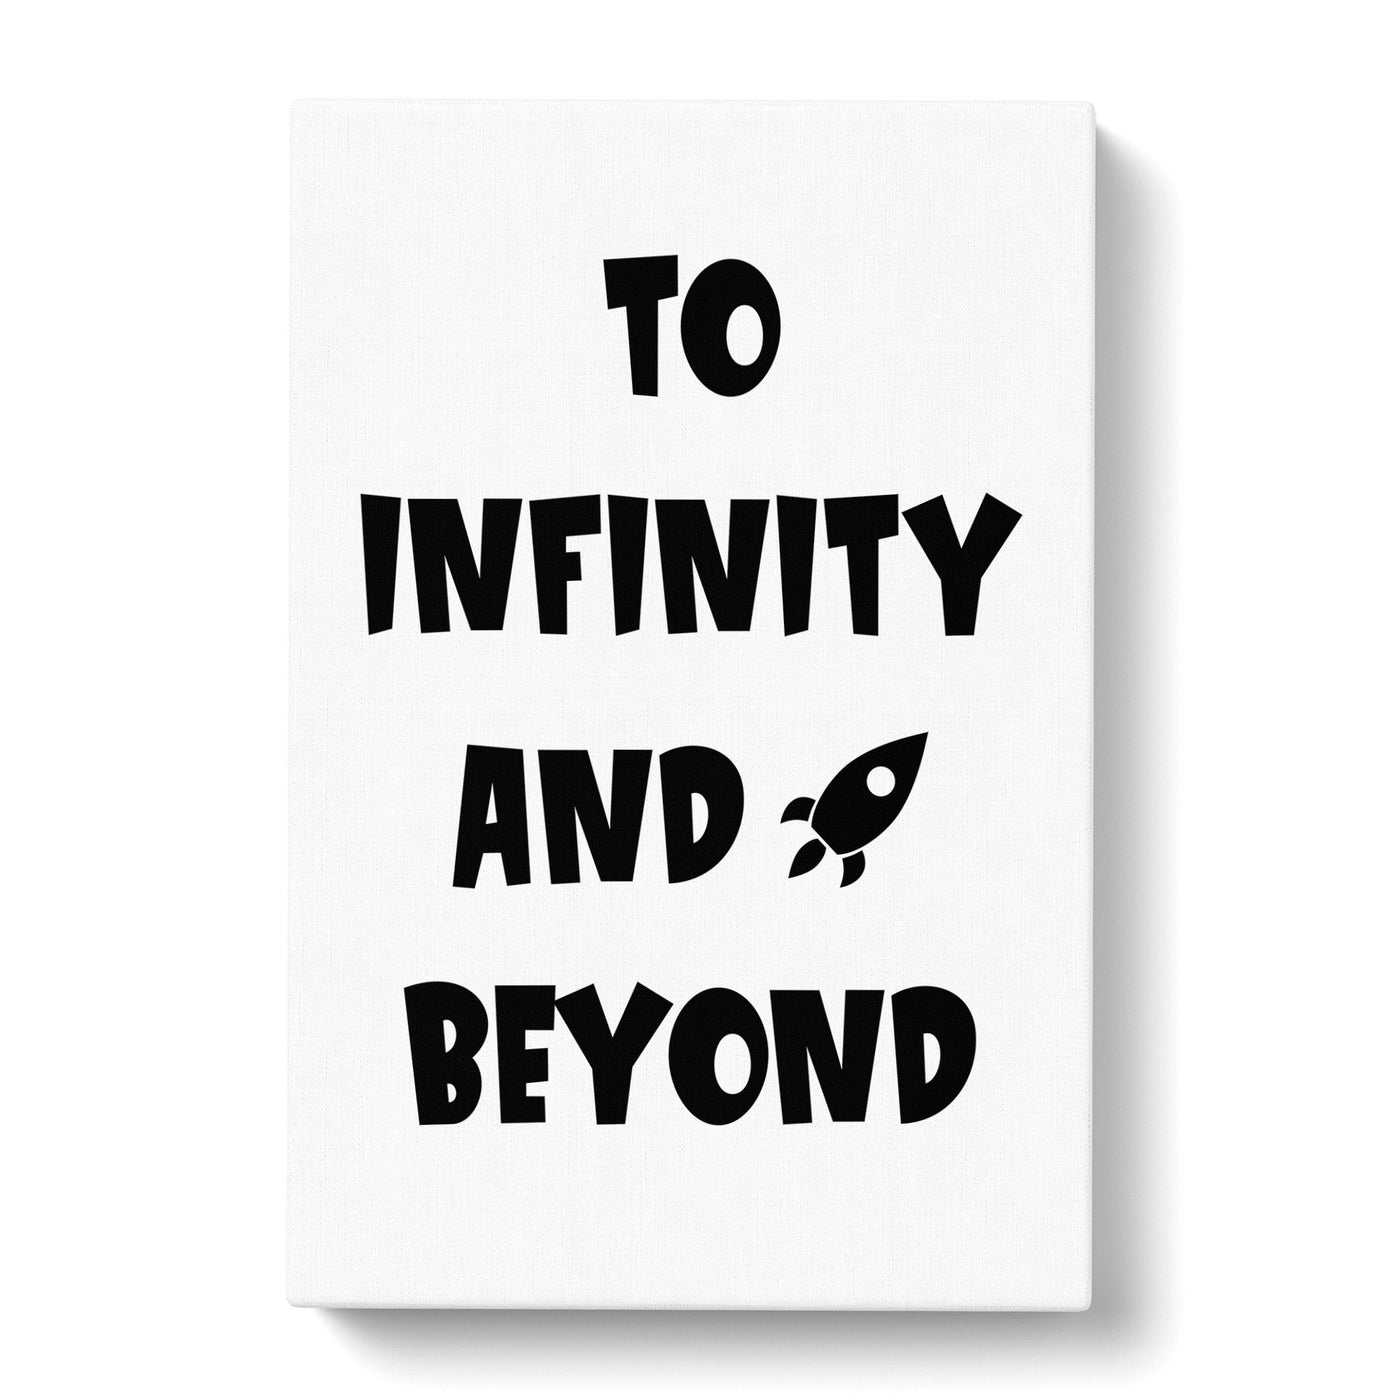 To Infinity And Beyond Typography Canvas Print Main Image